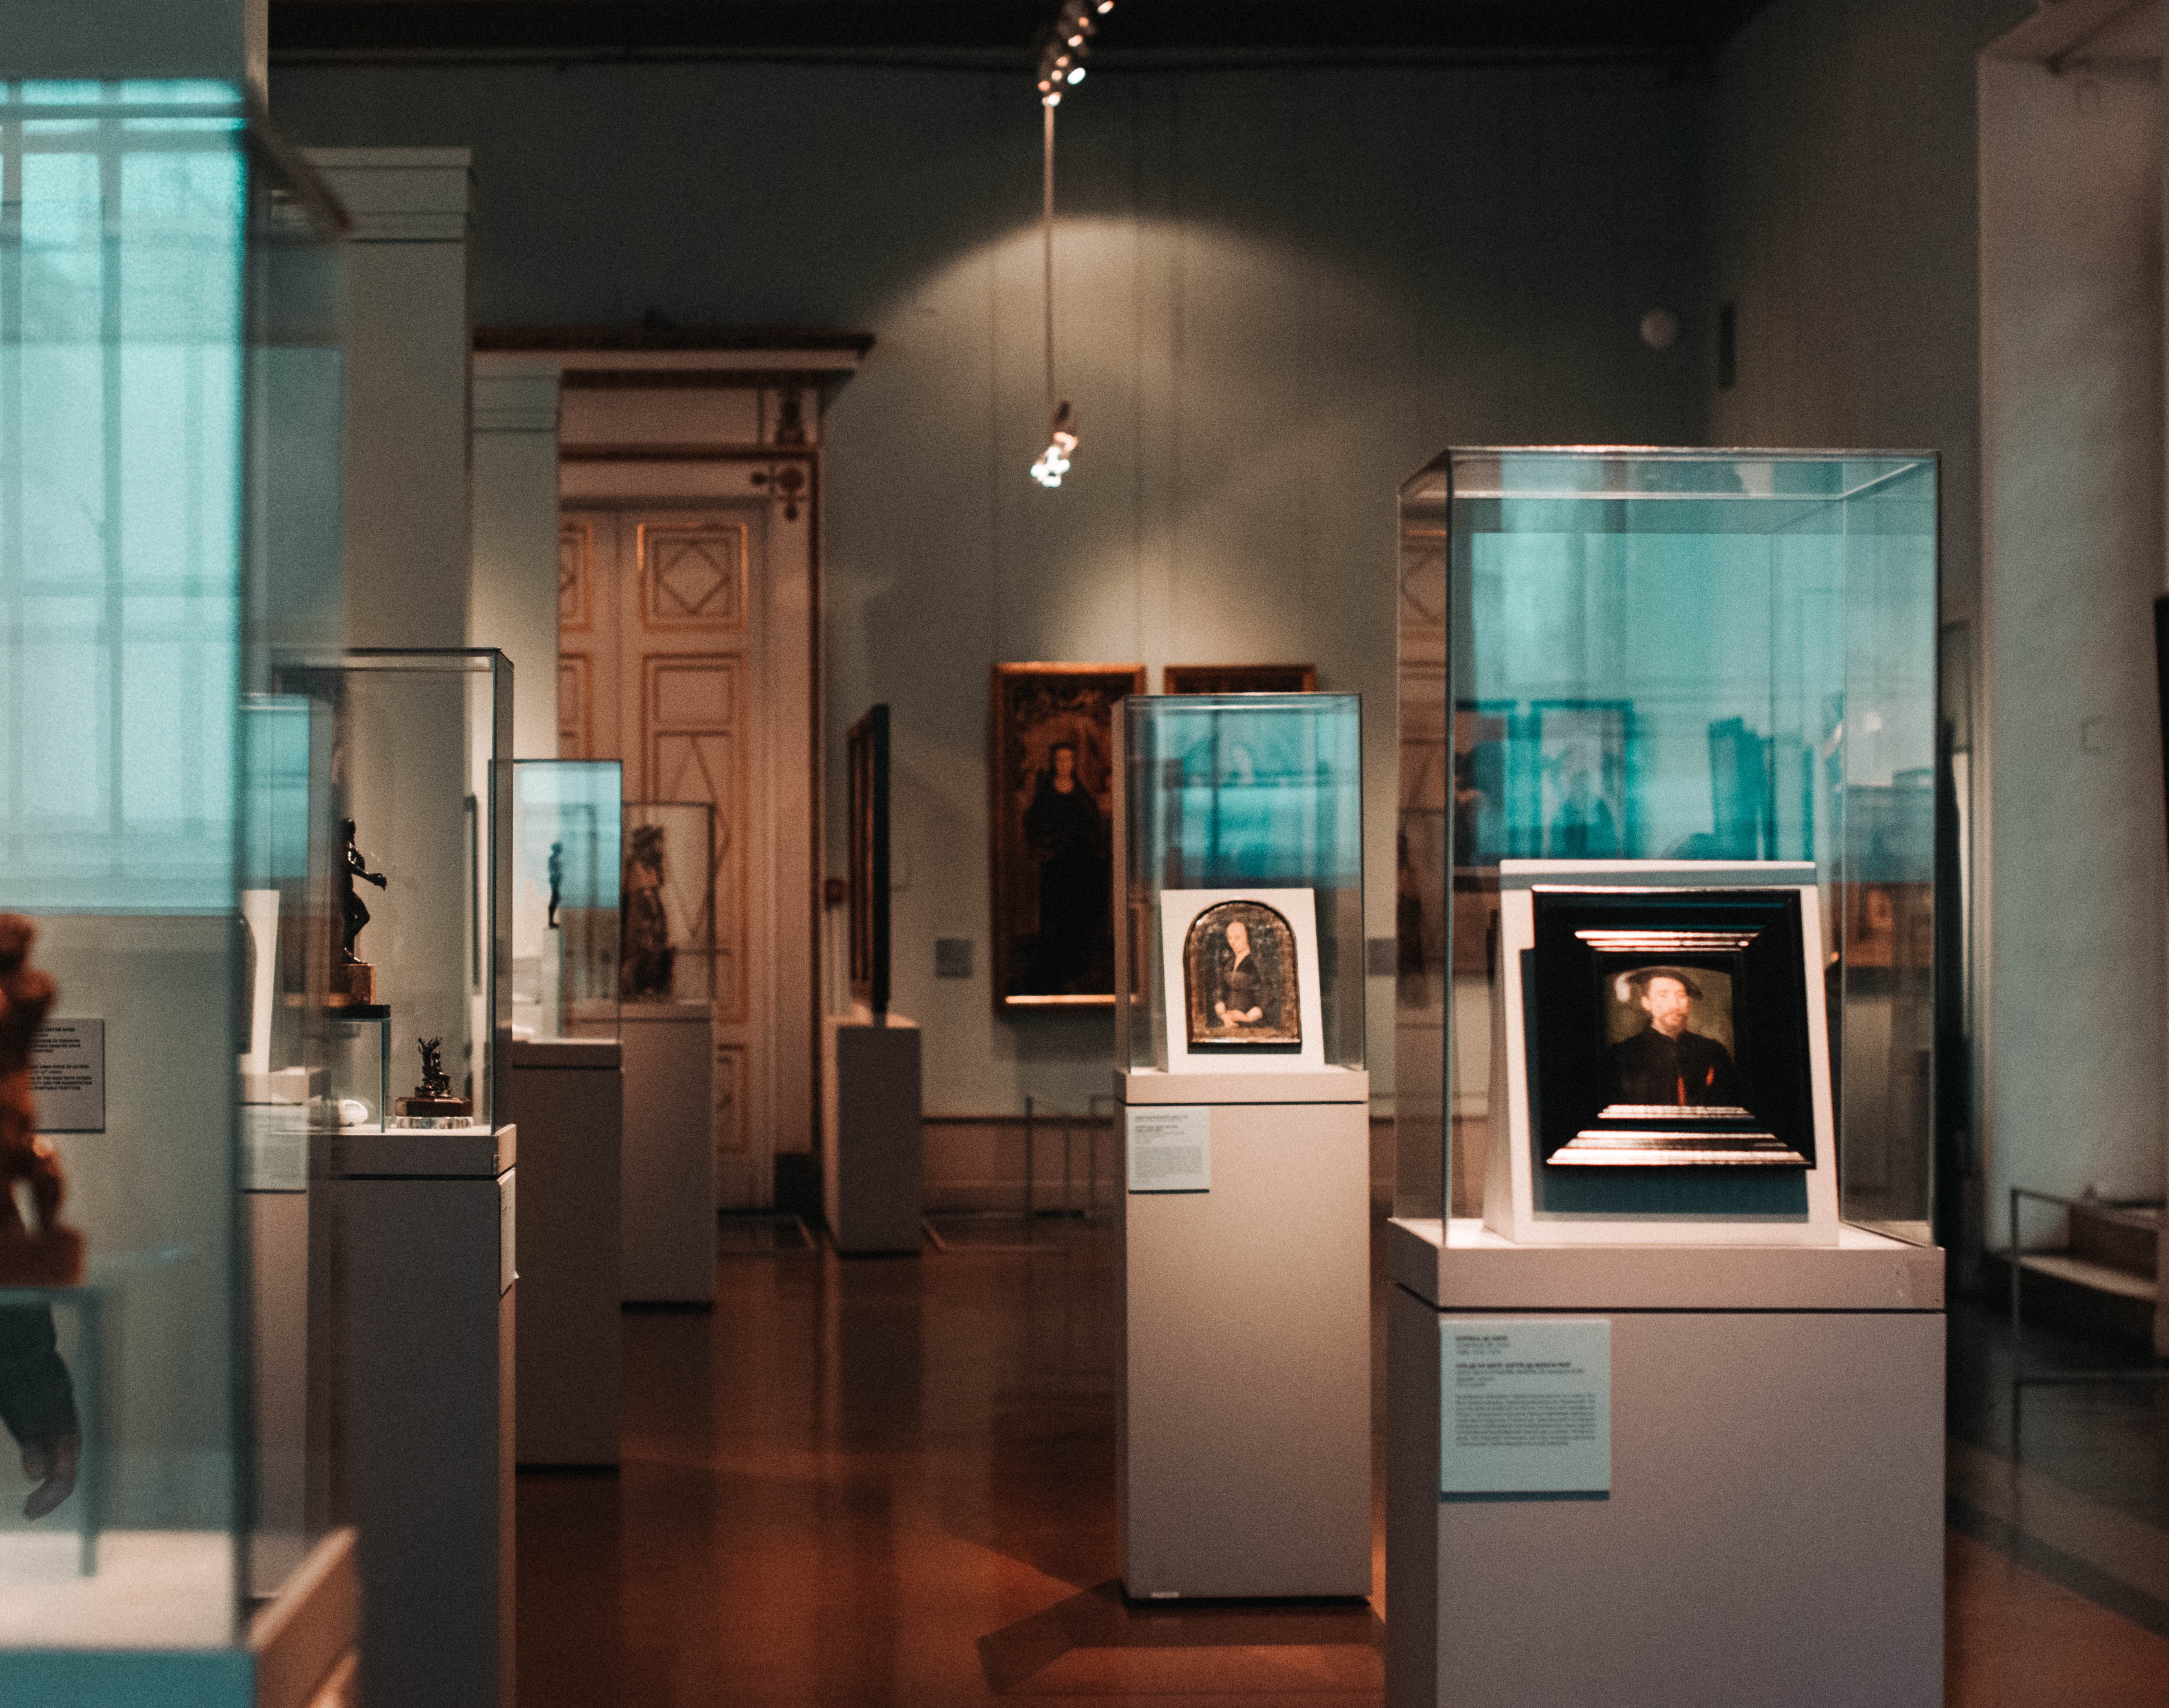 A view into a museum exhibit